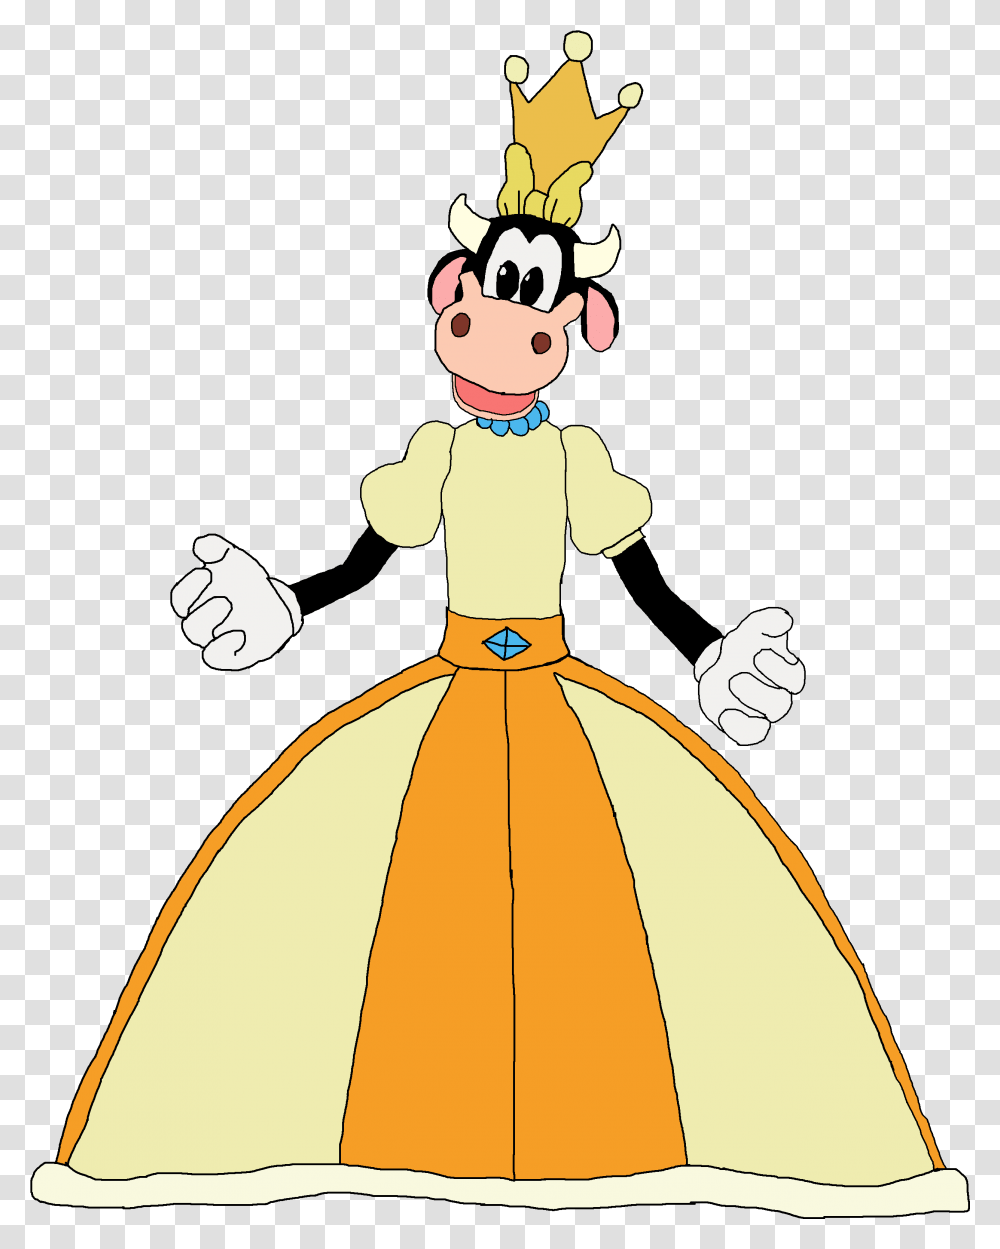 Cartoons Pictures Images Graphics For Facebook Whatsapp Clarabelle Cow Mickey Mouse, Costume, Tent, Snowman, Outdoors Transparent Png